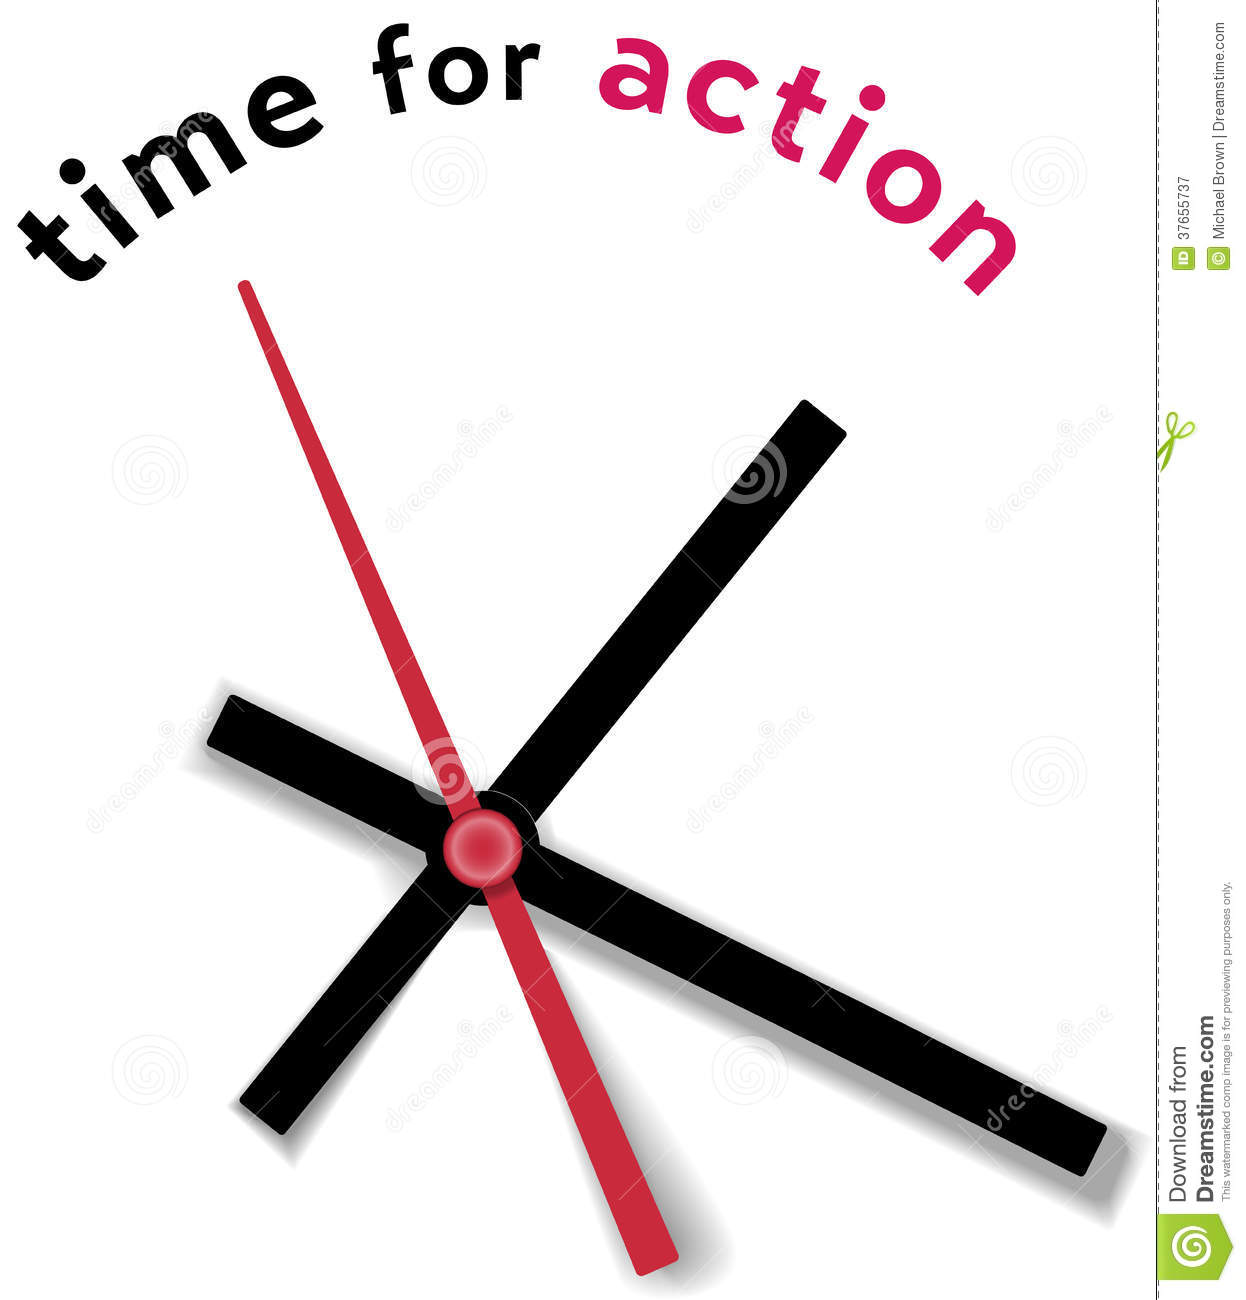 Time Clock Movement Call For Action Royalty Free Stock Photography